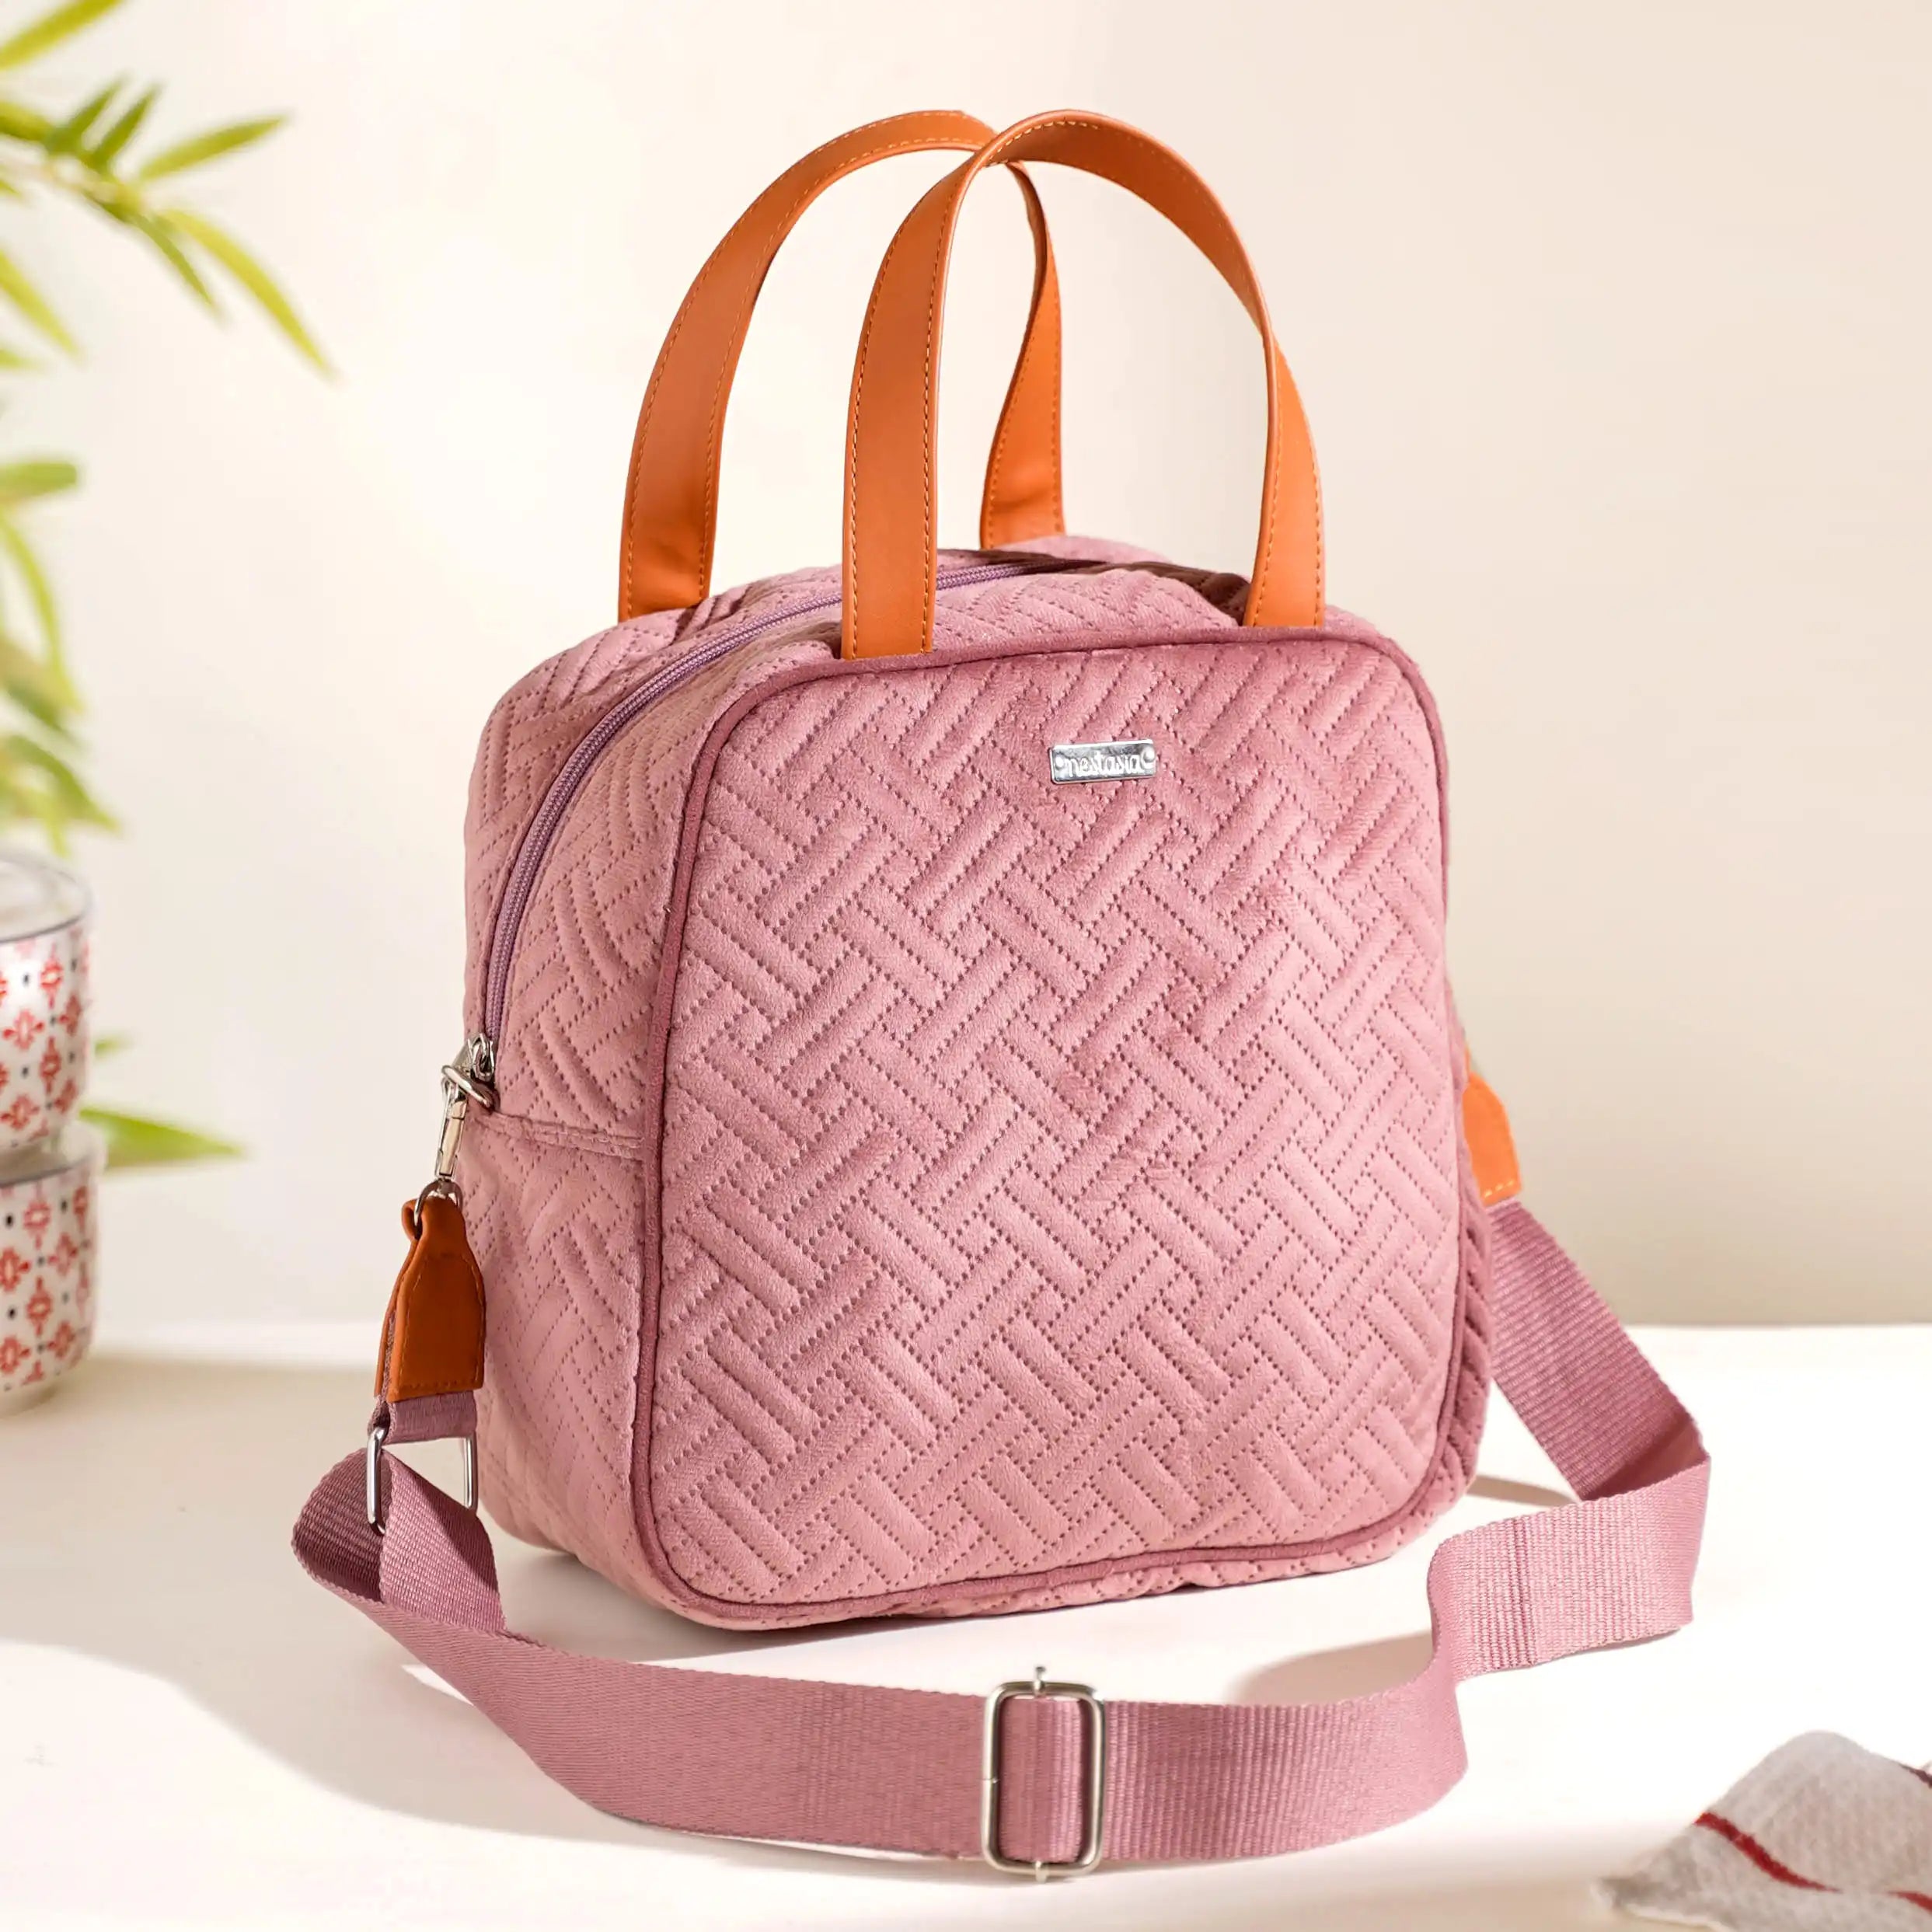 Lunch Bag - Buy Thermal Insulated Lunch Bag at Best Price | Nestasia